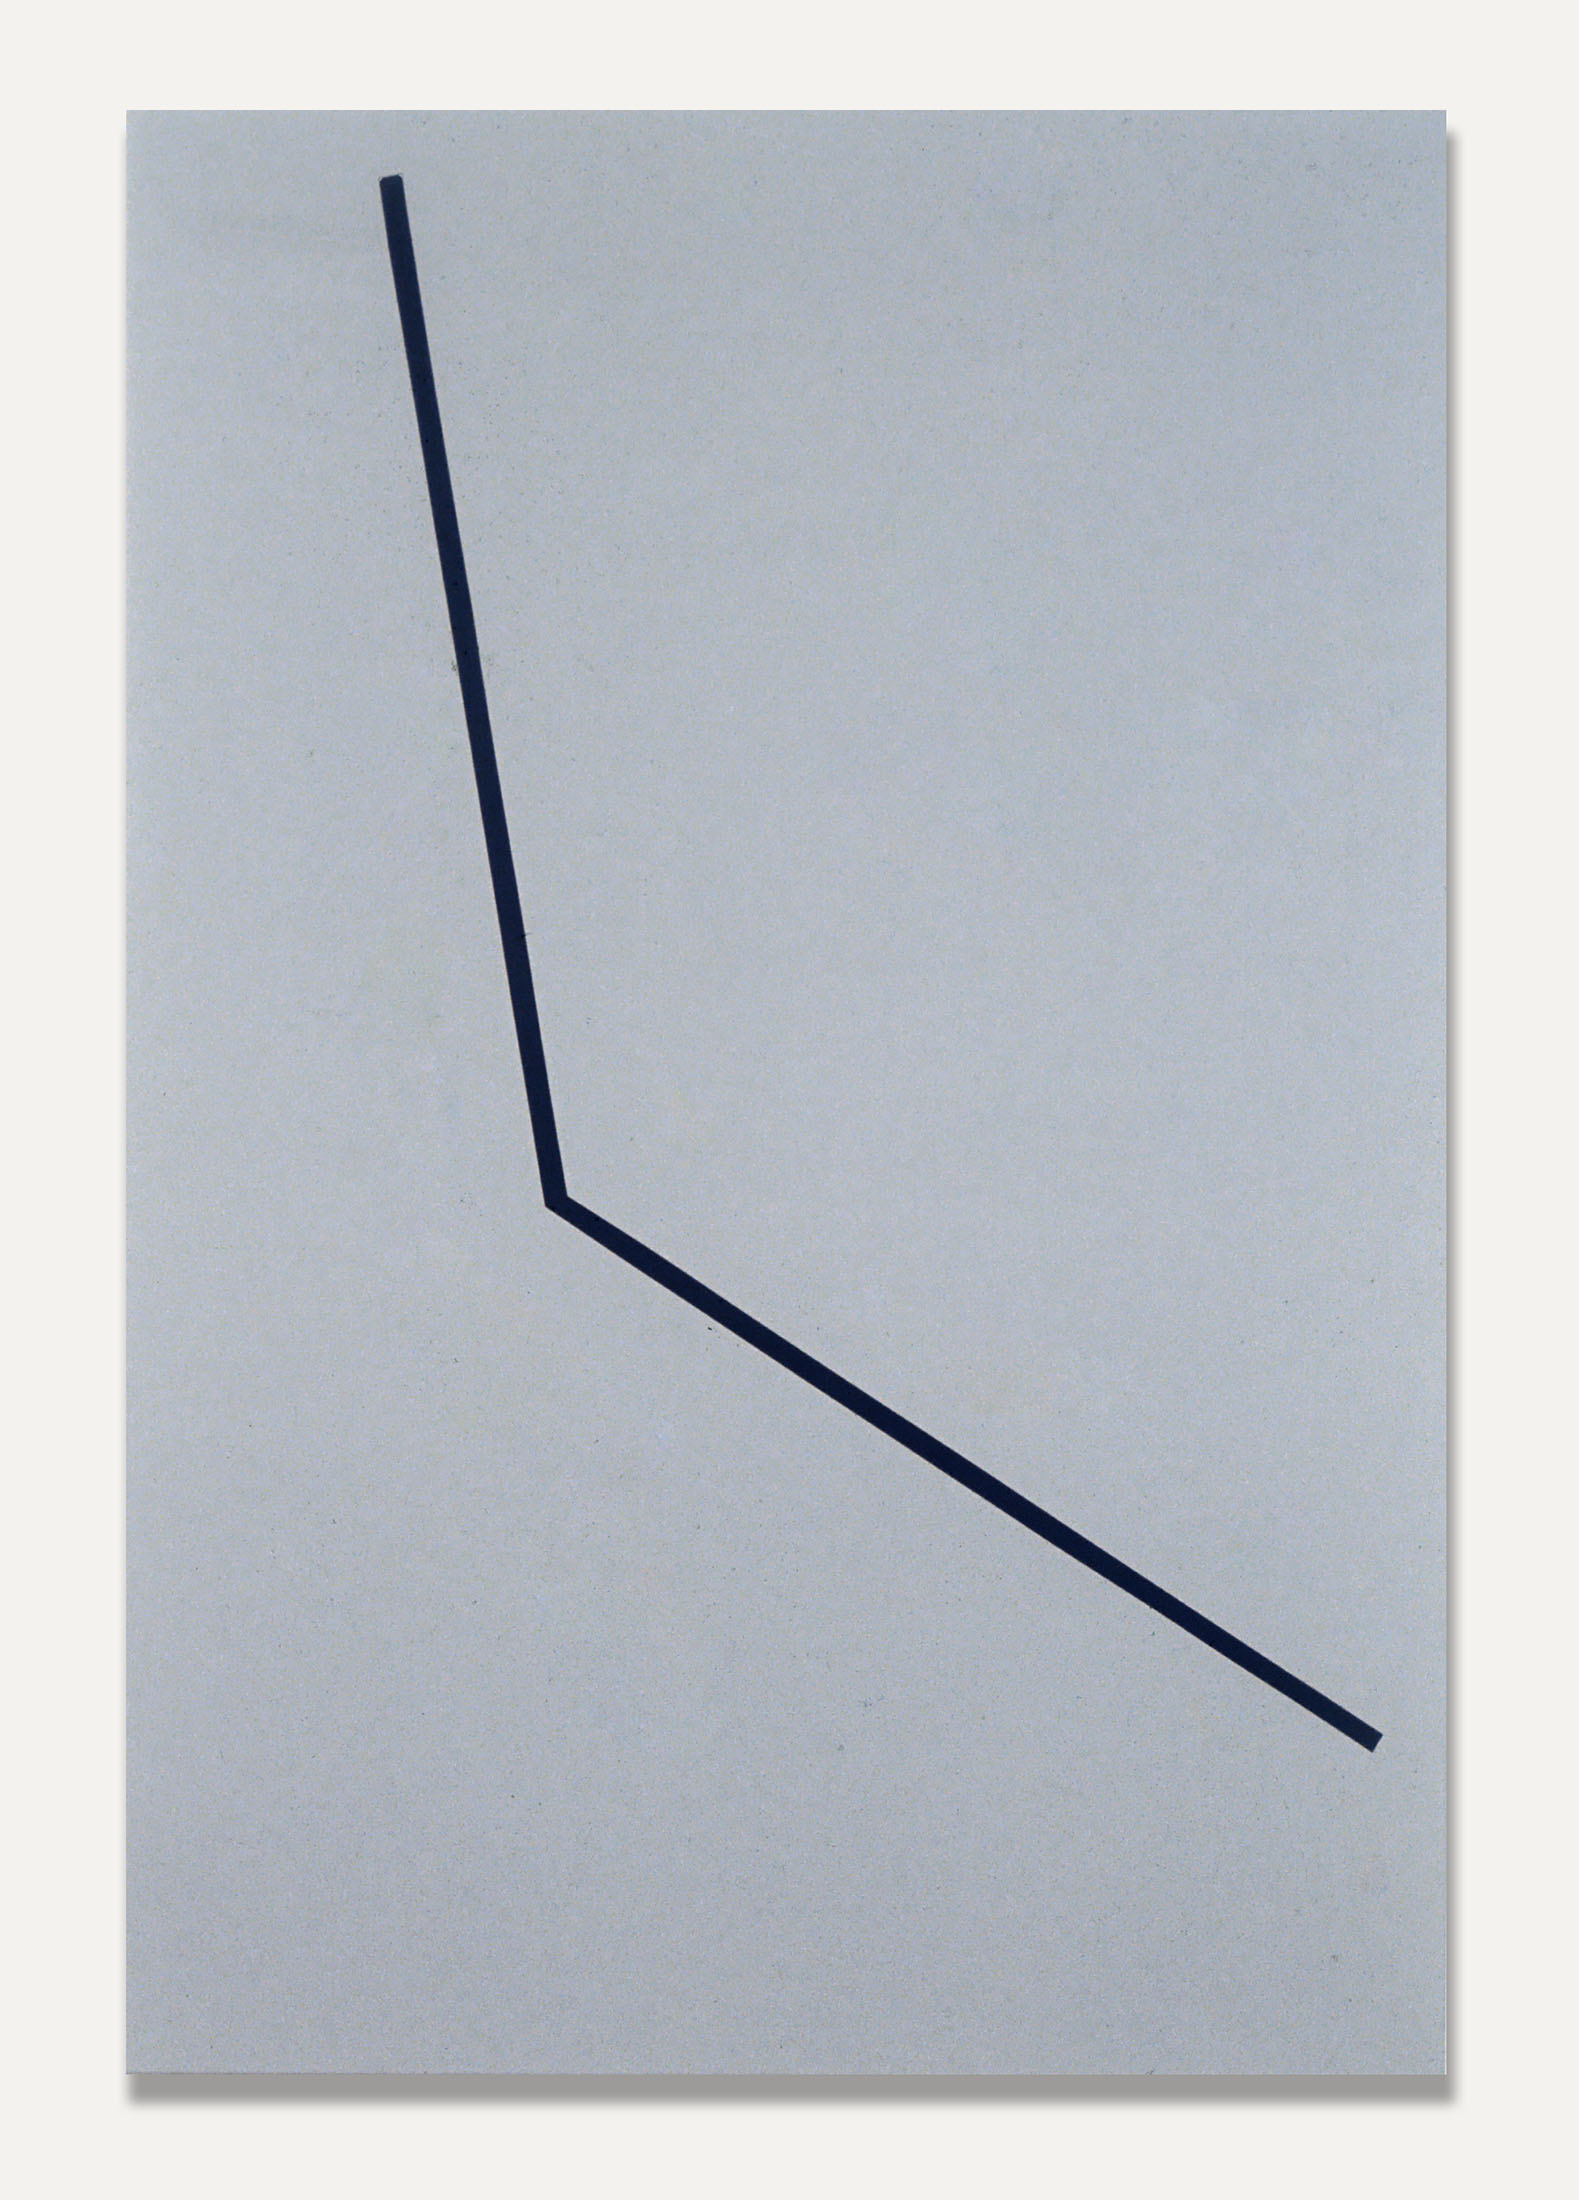 Black Line on Gray, 1992. Paint on canvas. Canvas: 72 x 48 x 0 1/2 in.